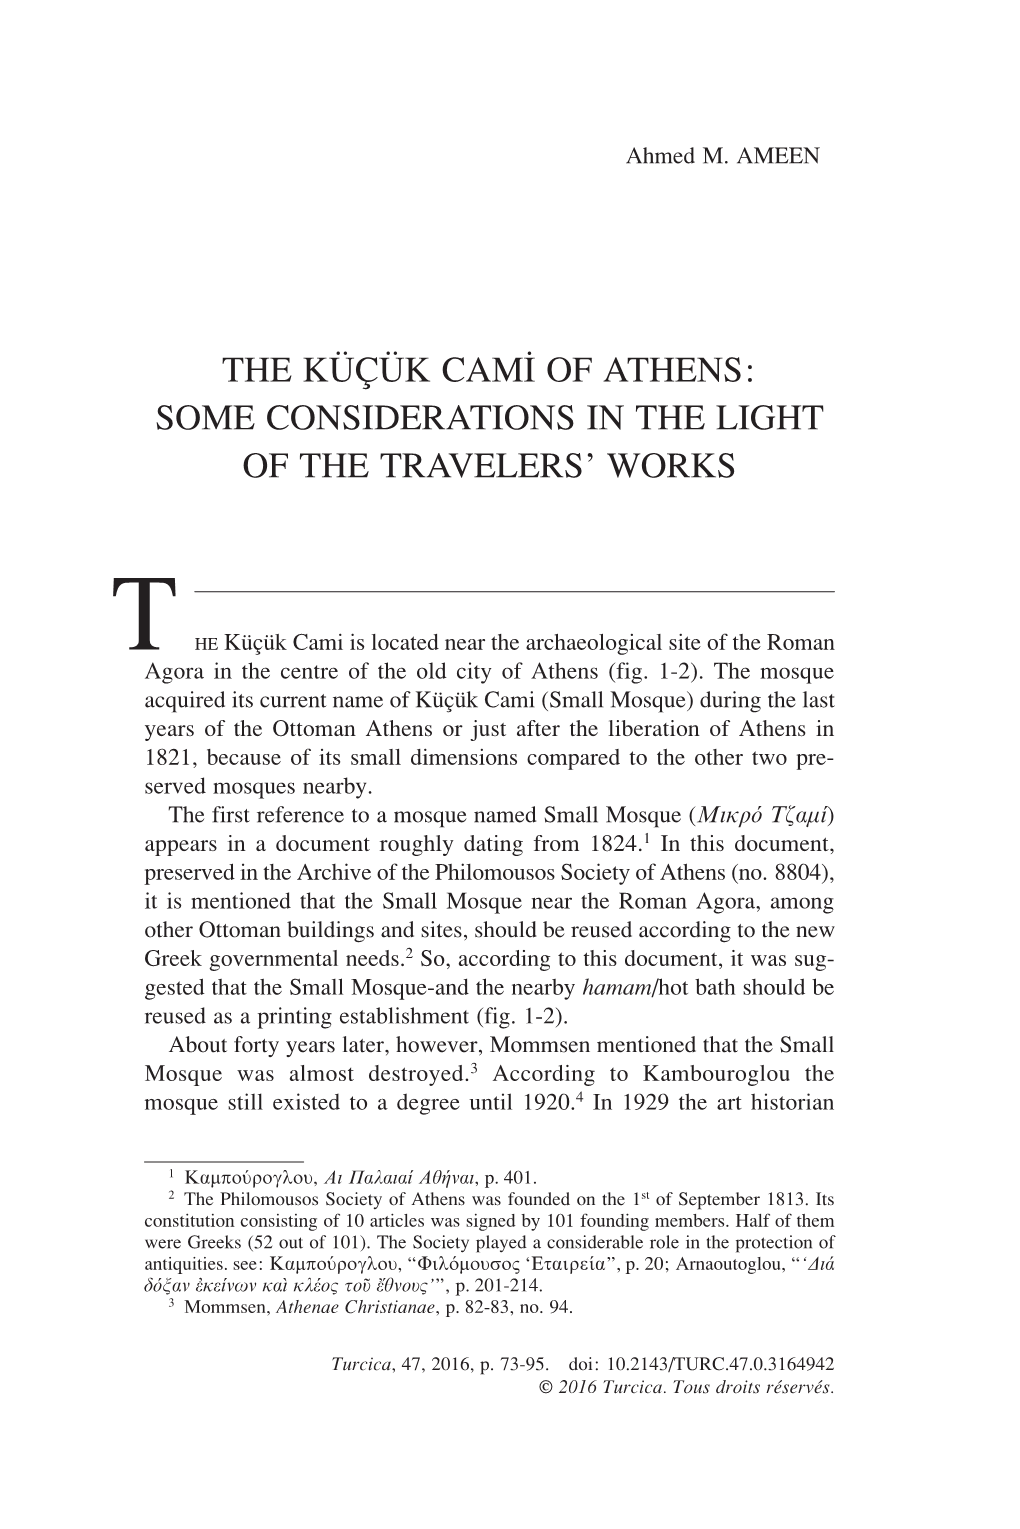 The Küçük Cami of Athens: Some Considerations in the Light of the Travelers’ Works